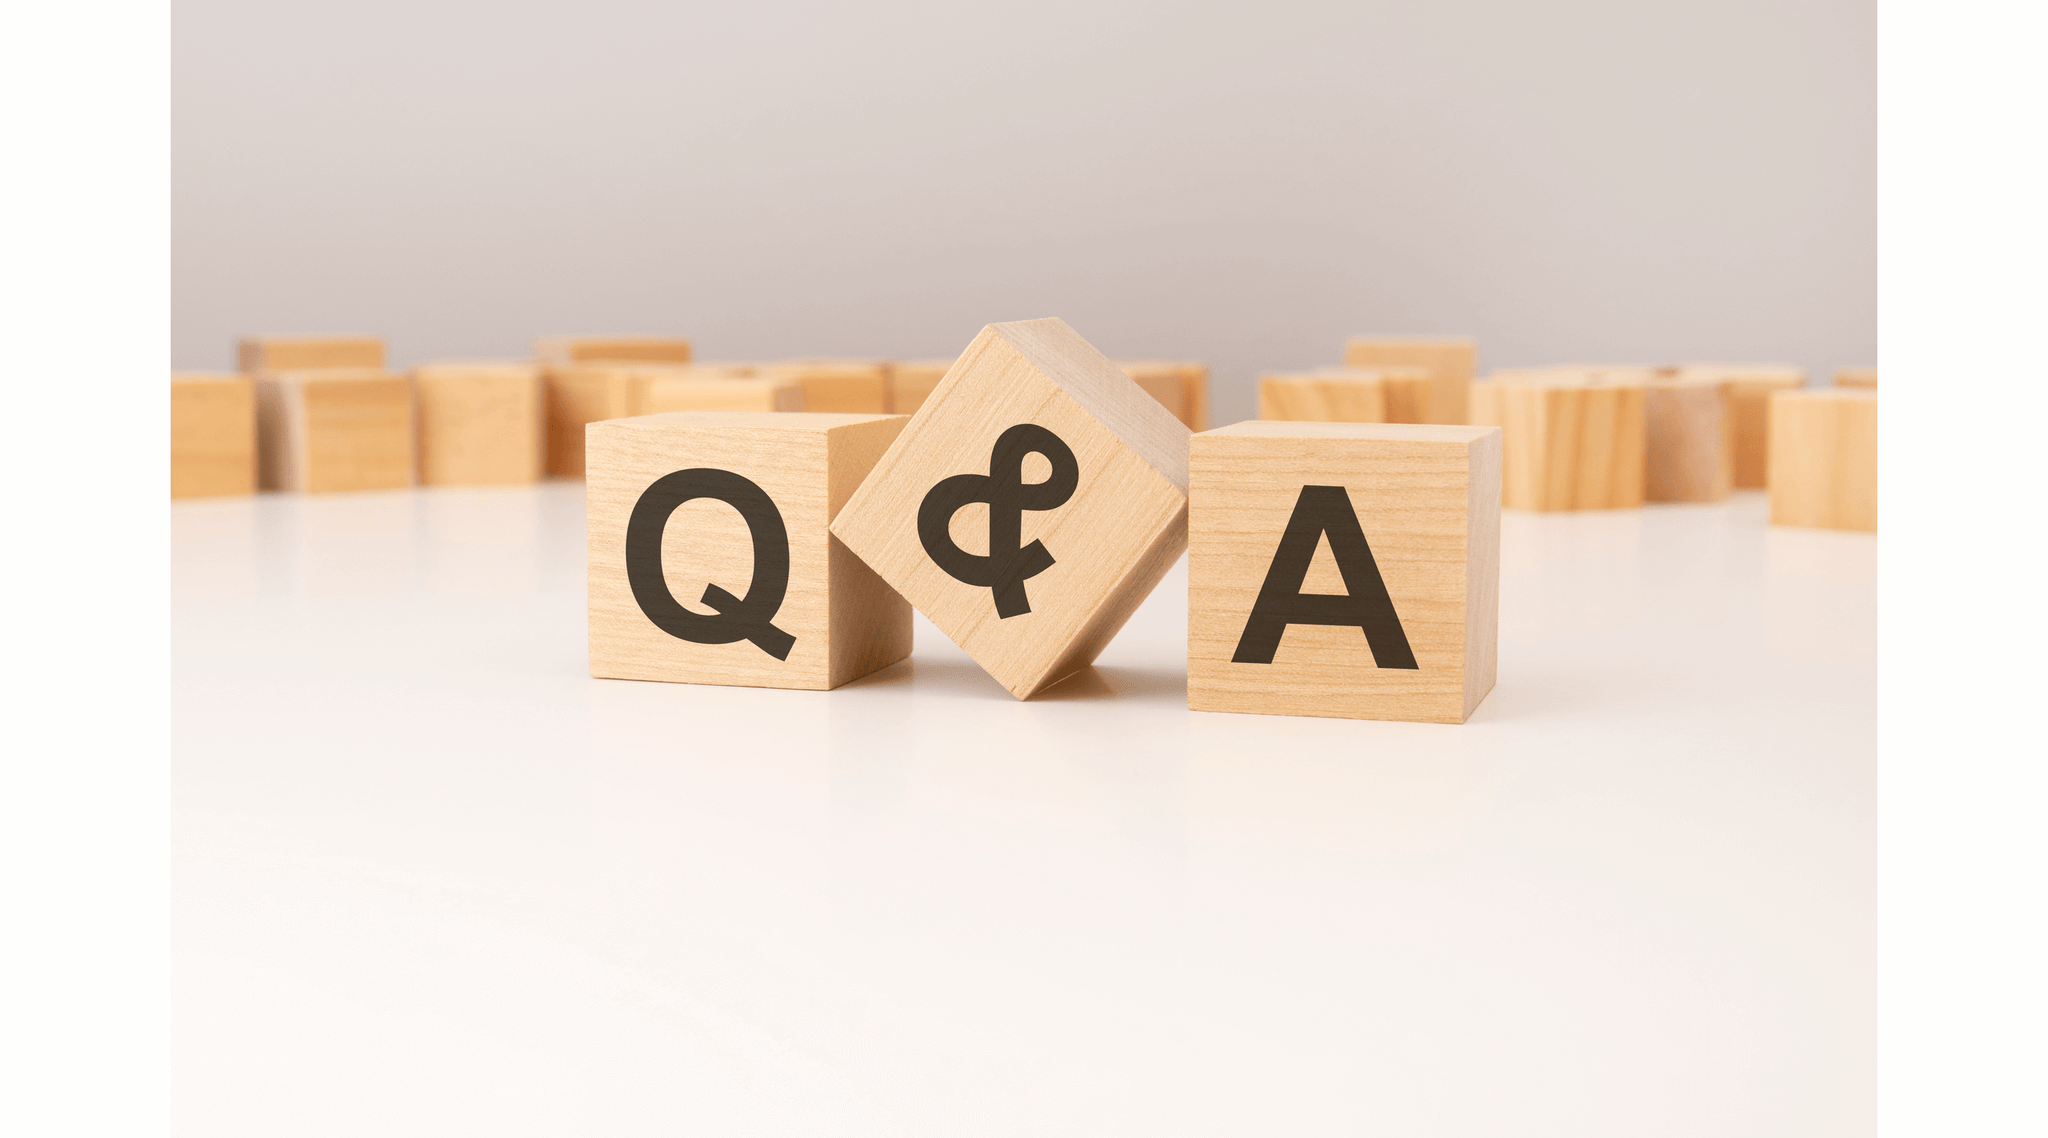 Three wooden cubes with Q and A symbols on them.